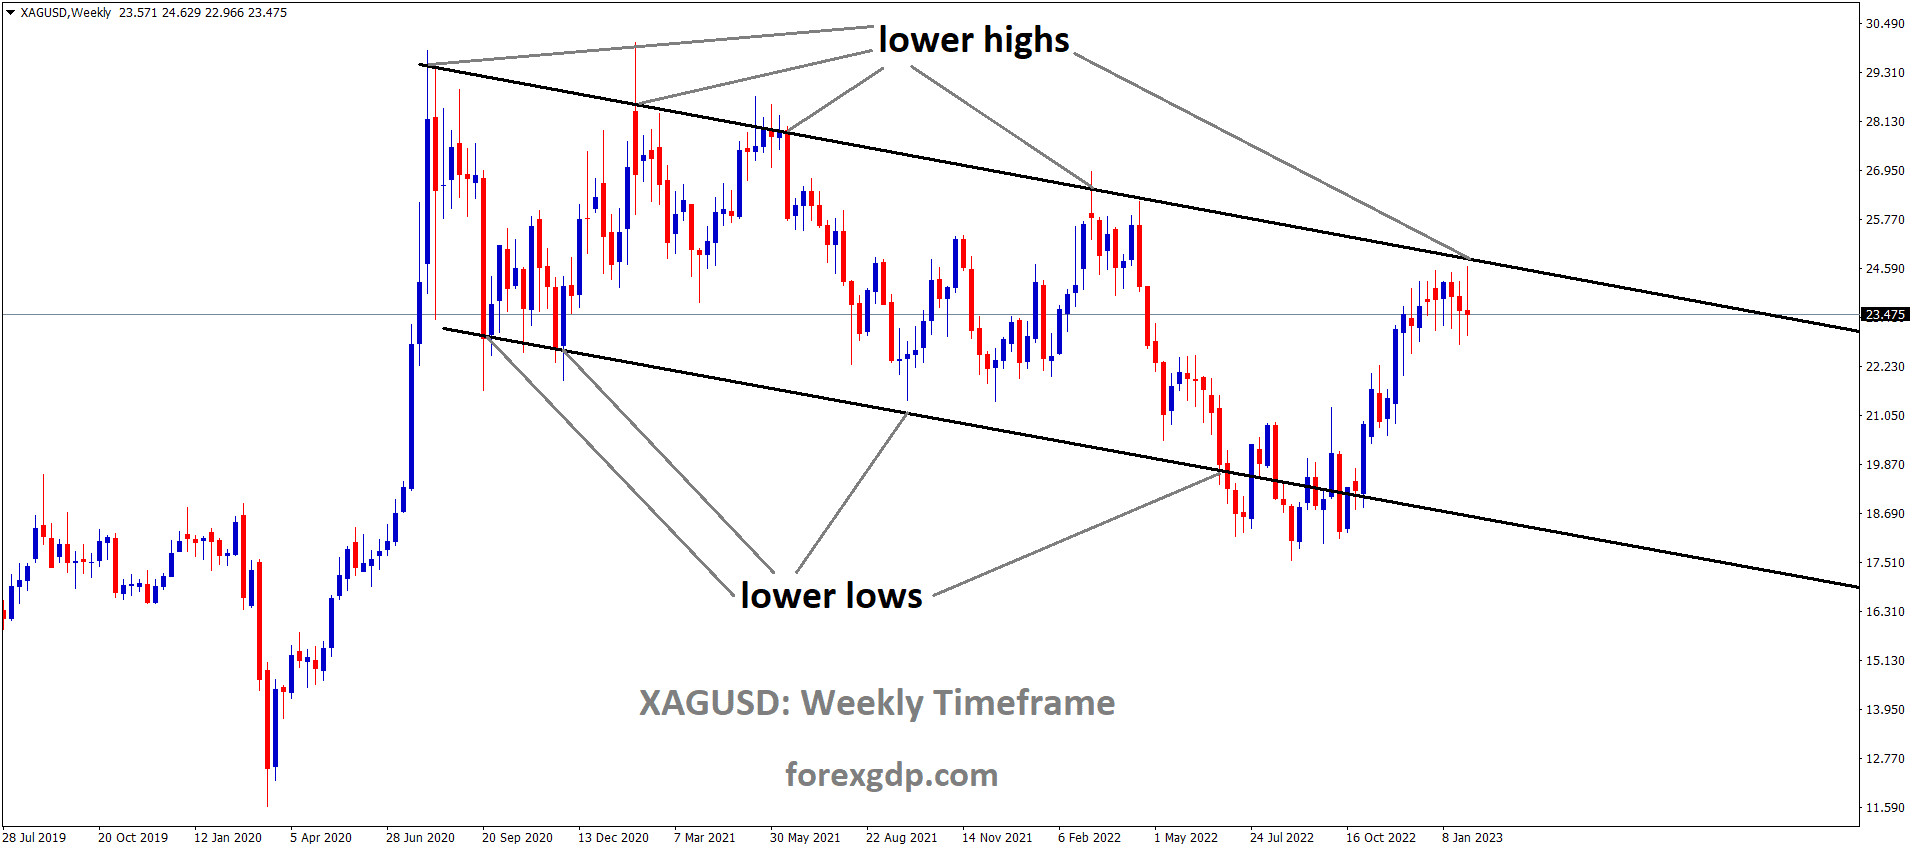 XAGUSD Silver Price is moving in the Descending channel and the market has reached the lower high area of the channel 1